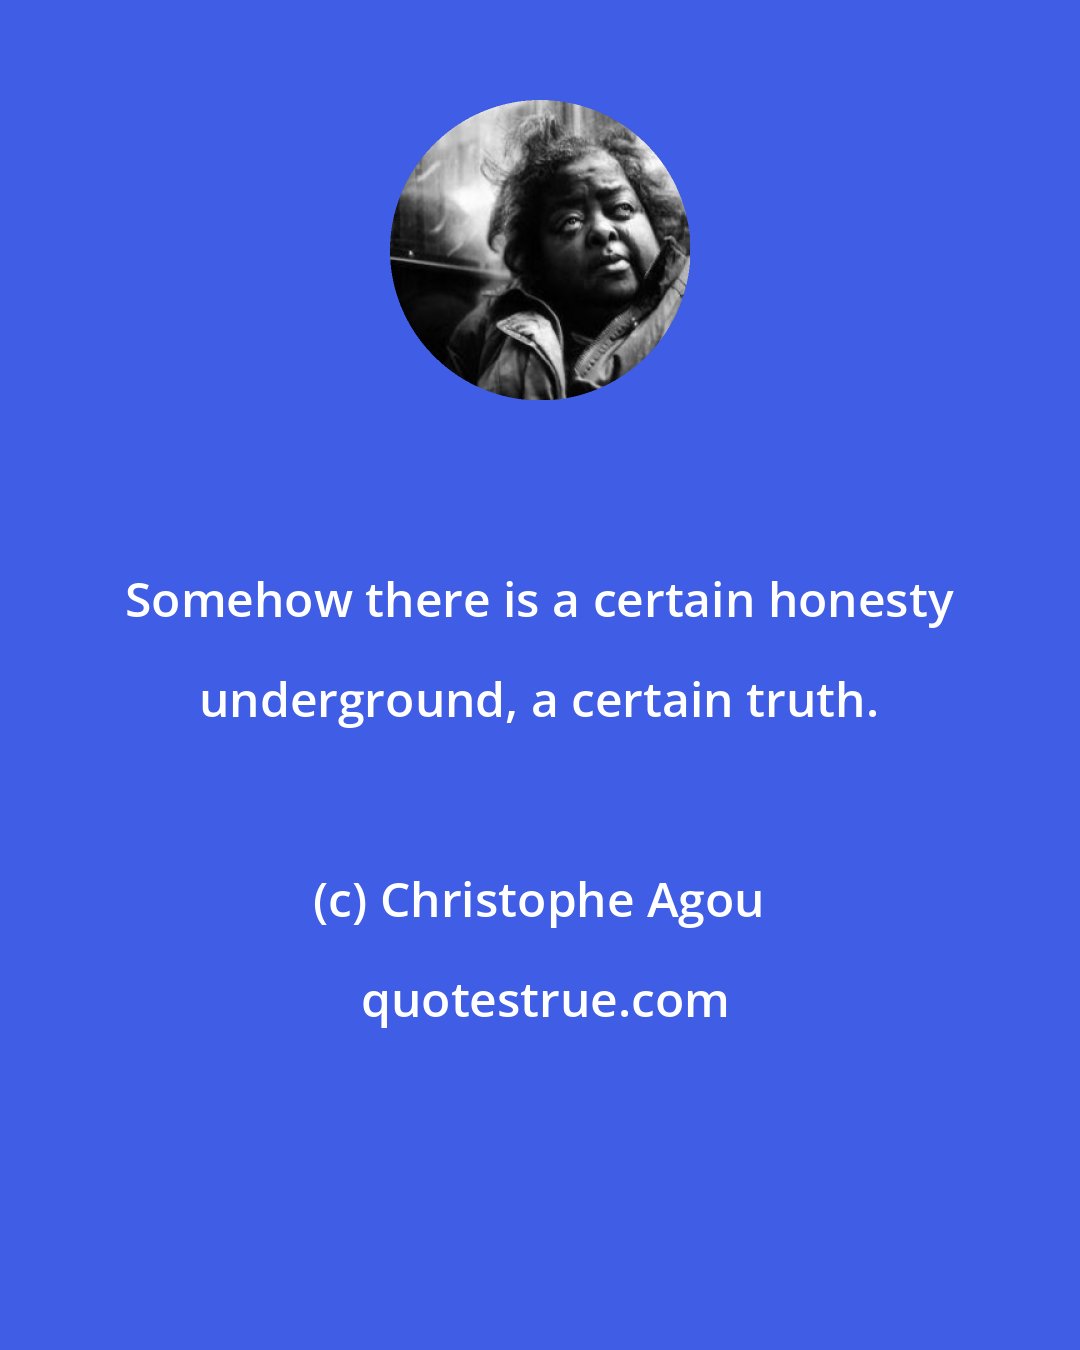 Christophe Agou: Somehow there is a certain honesty underground, a certain truth.